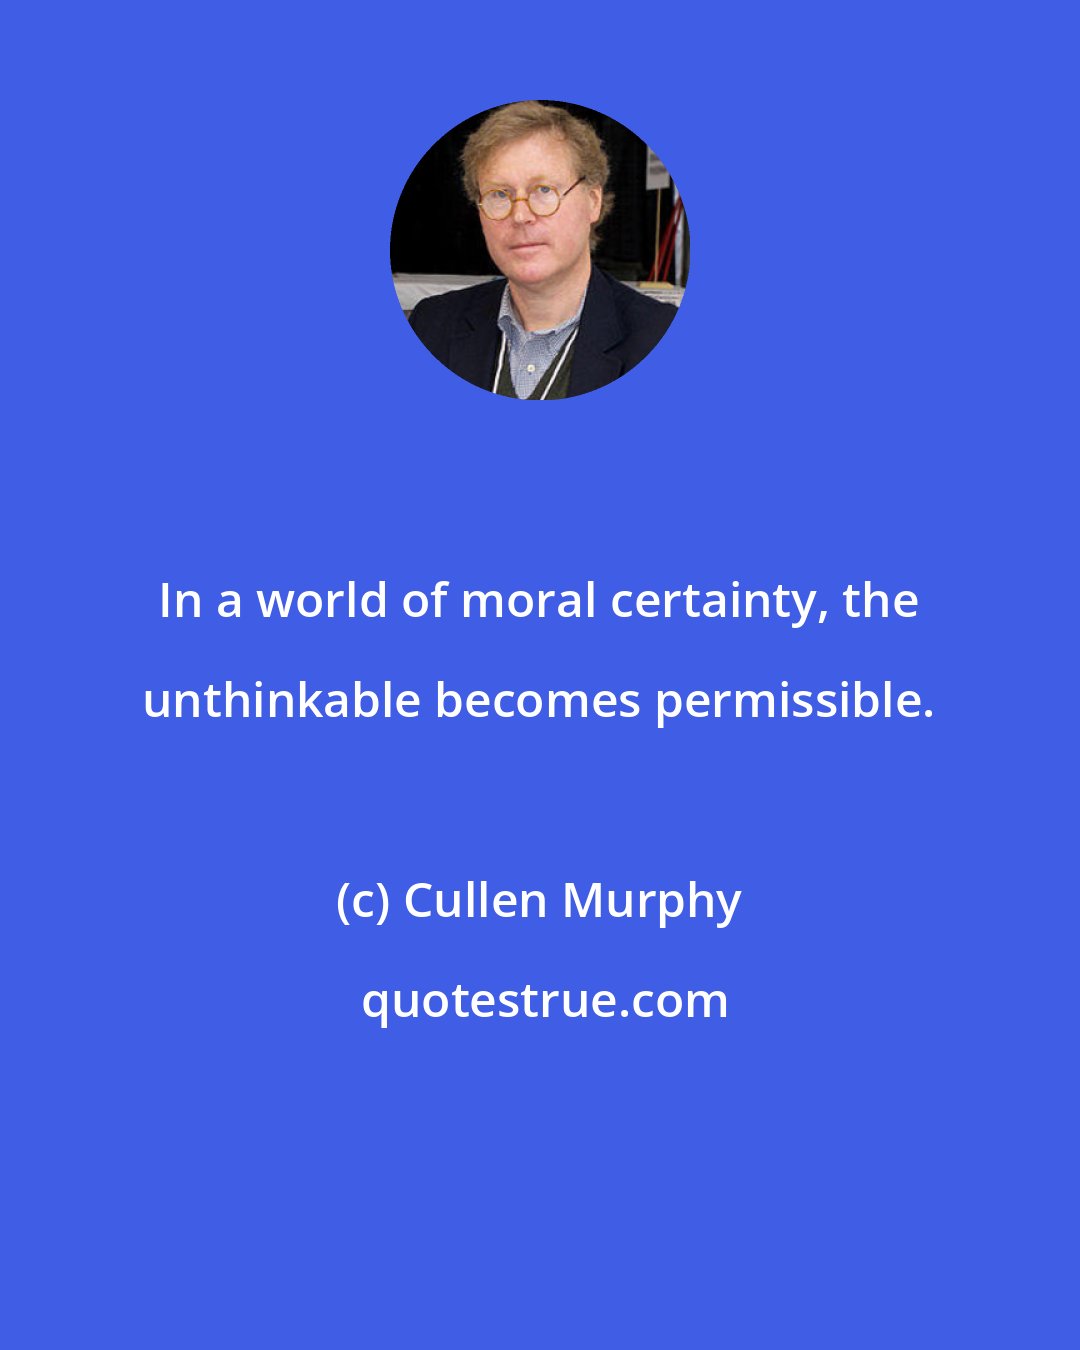 Cullen Murphy: In a world of moral certainty, the unthinkable becomes permissible.